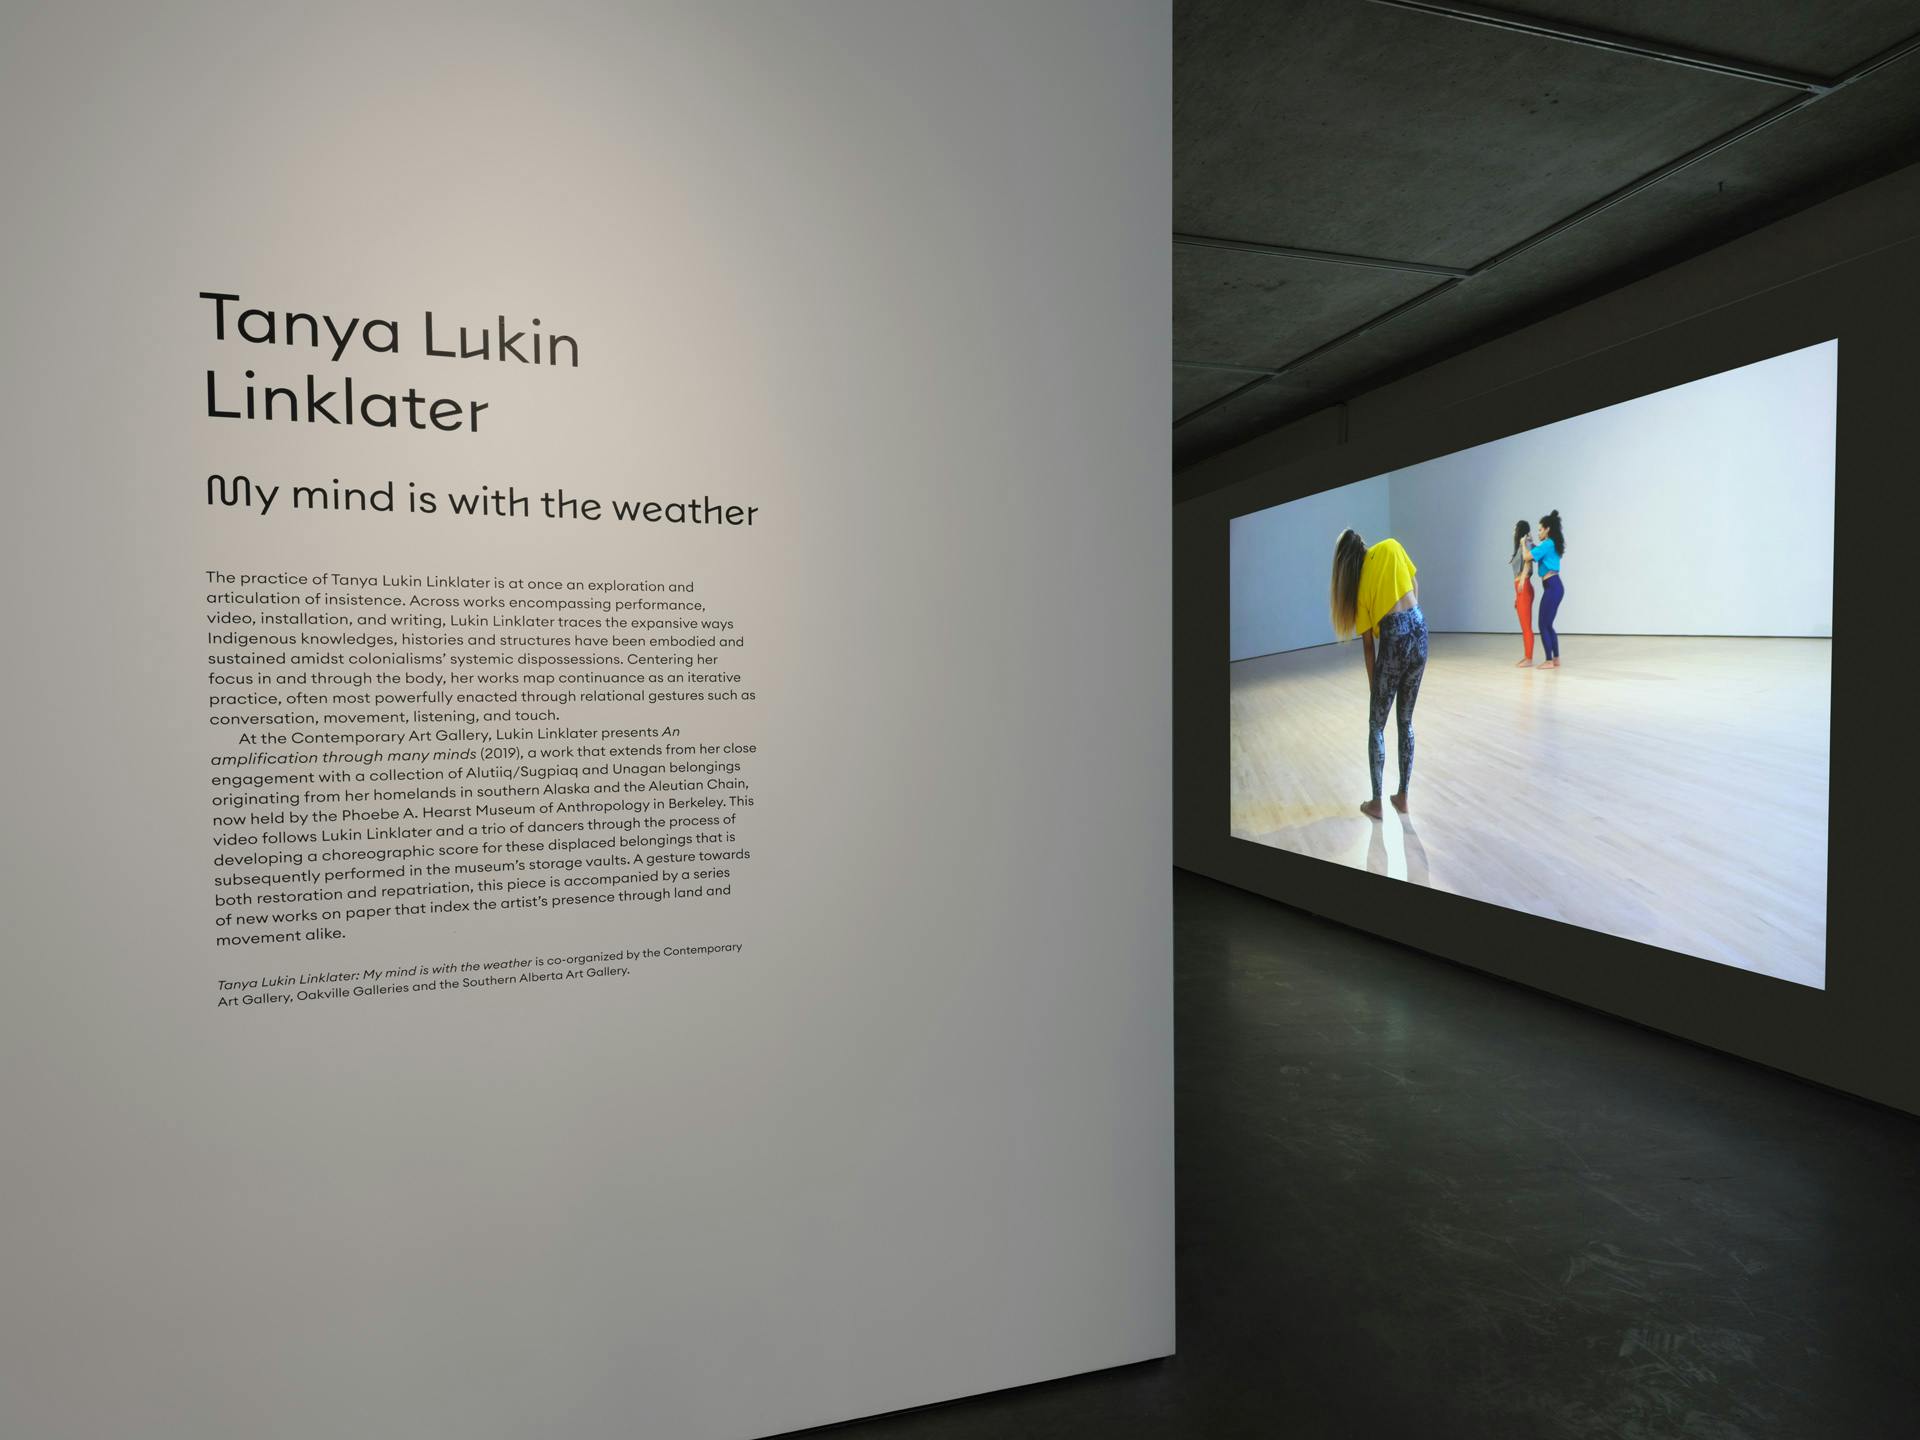 Entryway into a gallery with a video projection by Tanya Lukin Linklater visible on an interior wall. Video depicts three dancers in mid-movement in a room with white walls and wood floor.